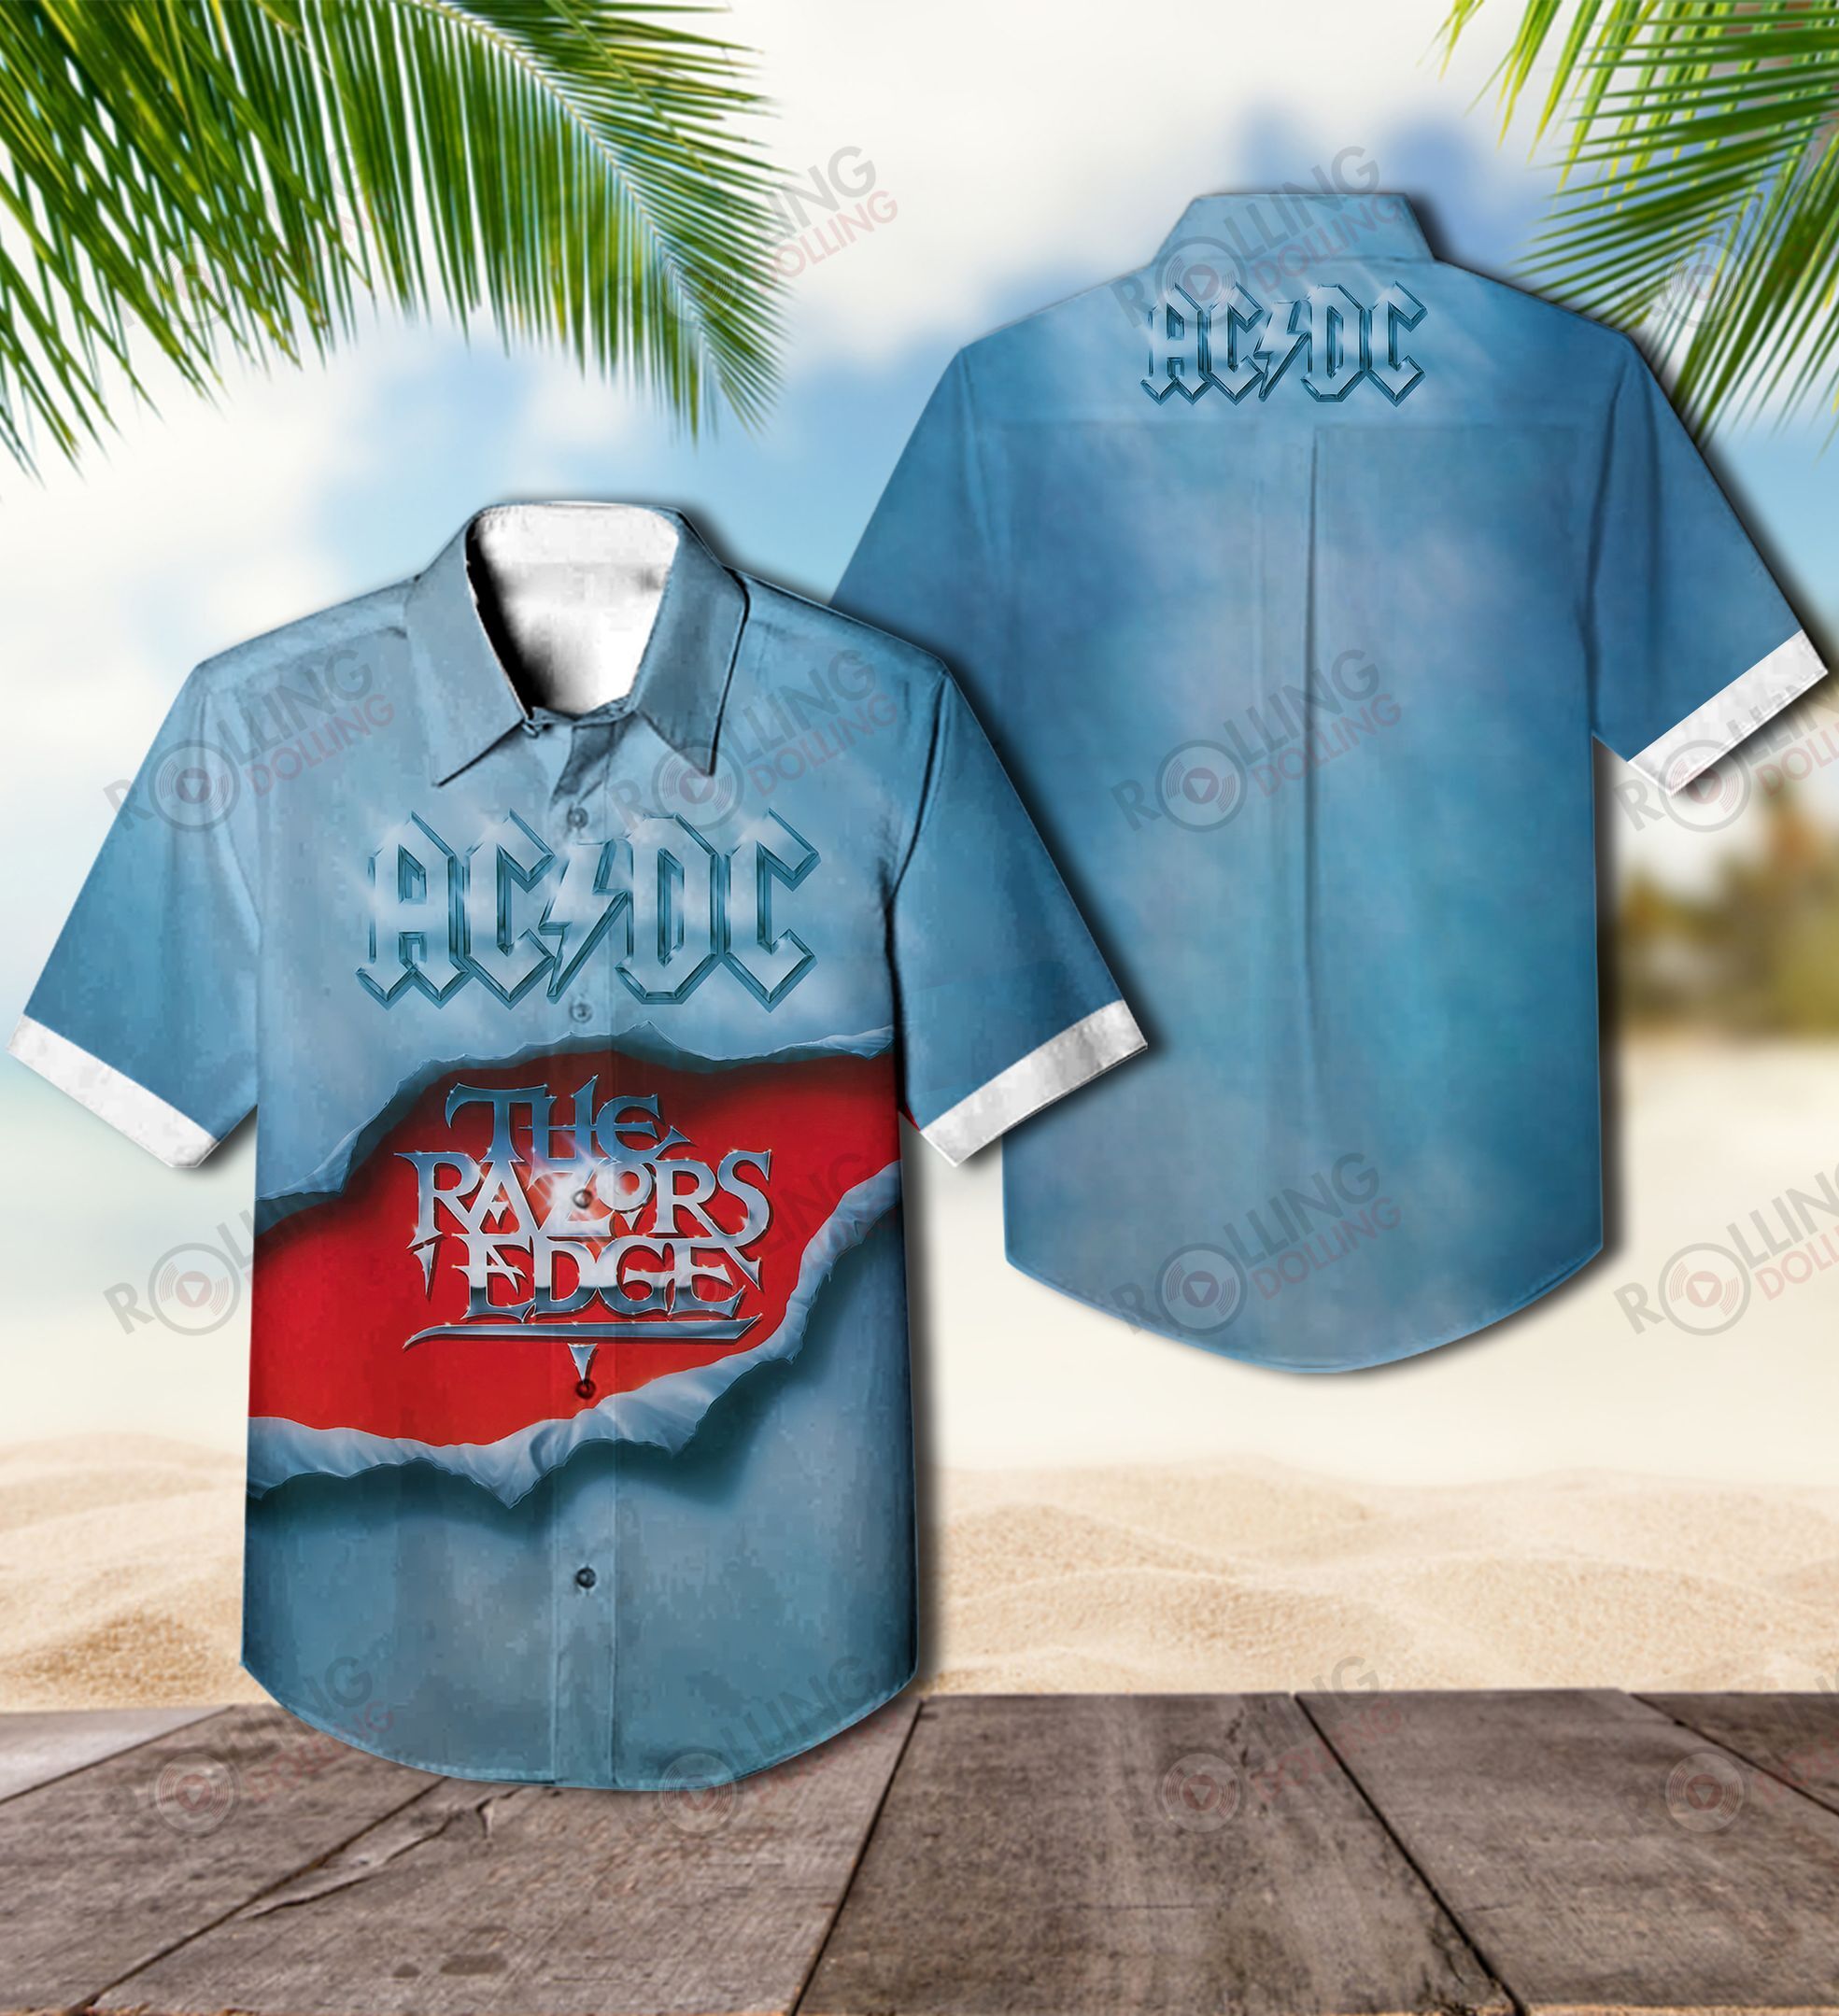 We have compiled a list of some of the best Hawaiian shirt that are available 23